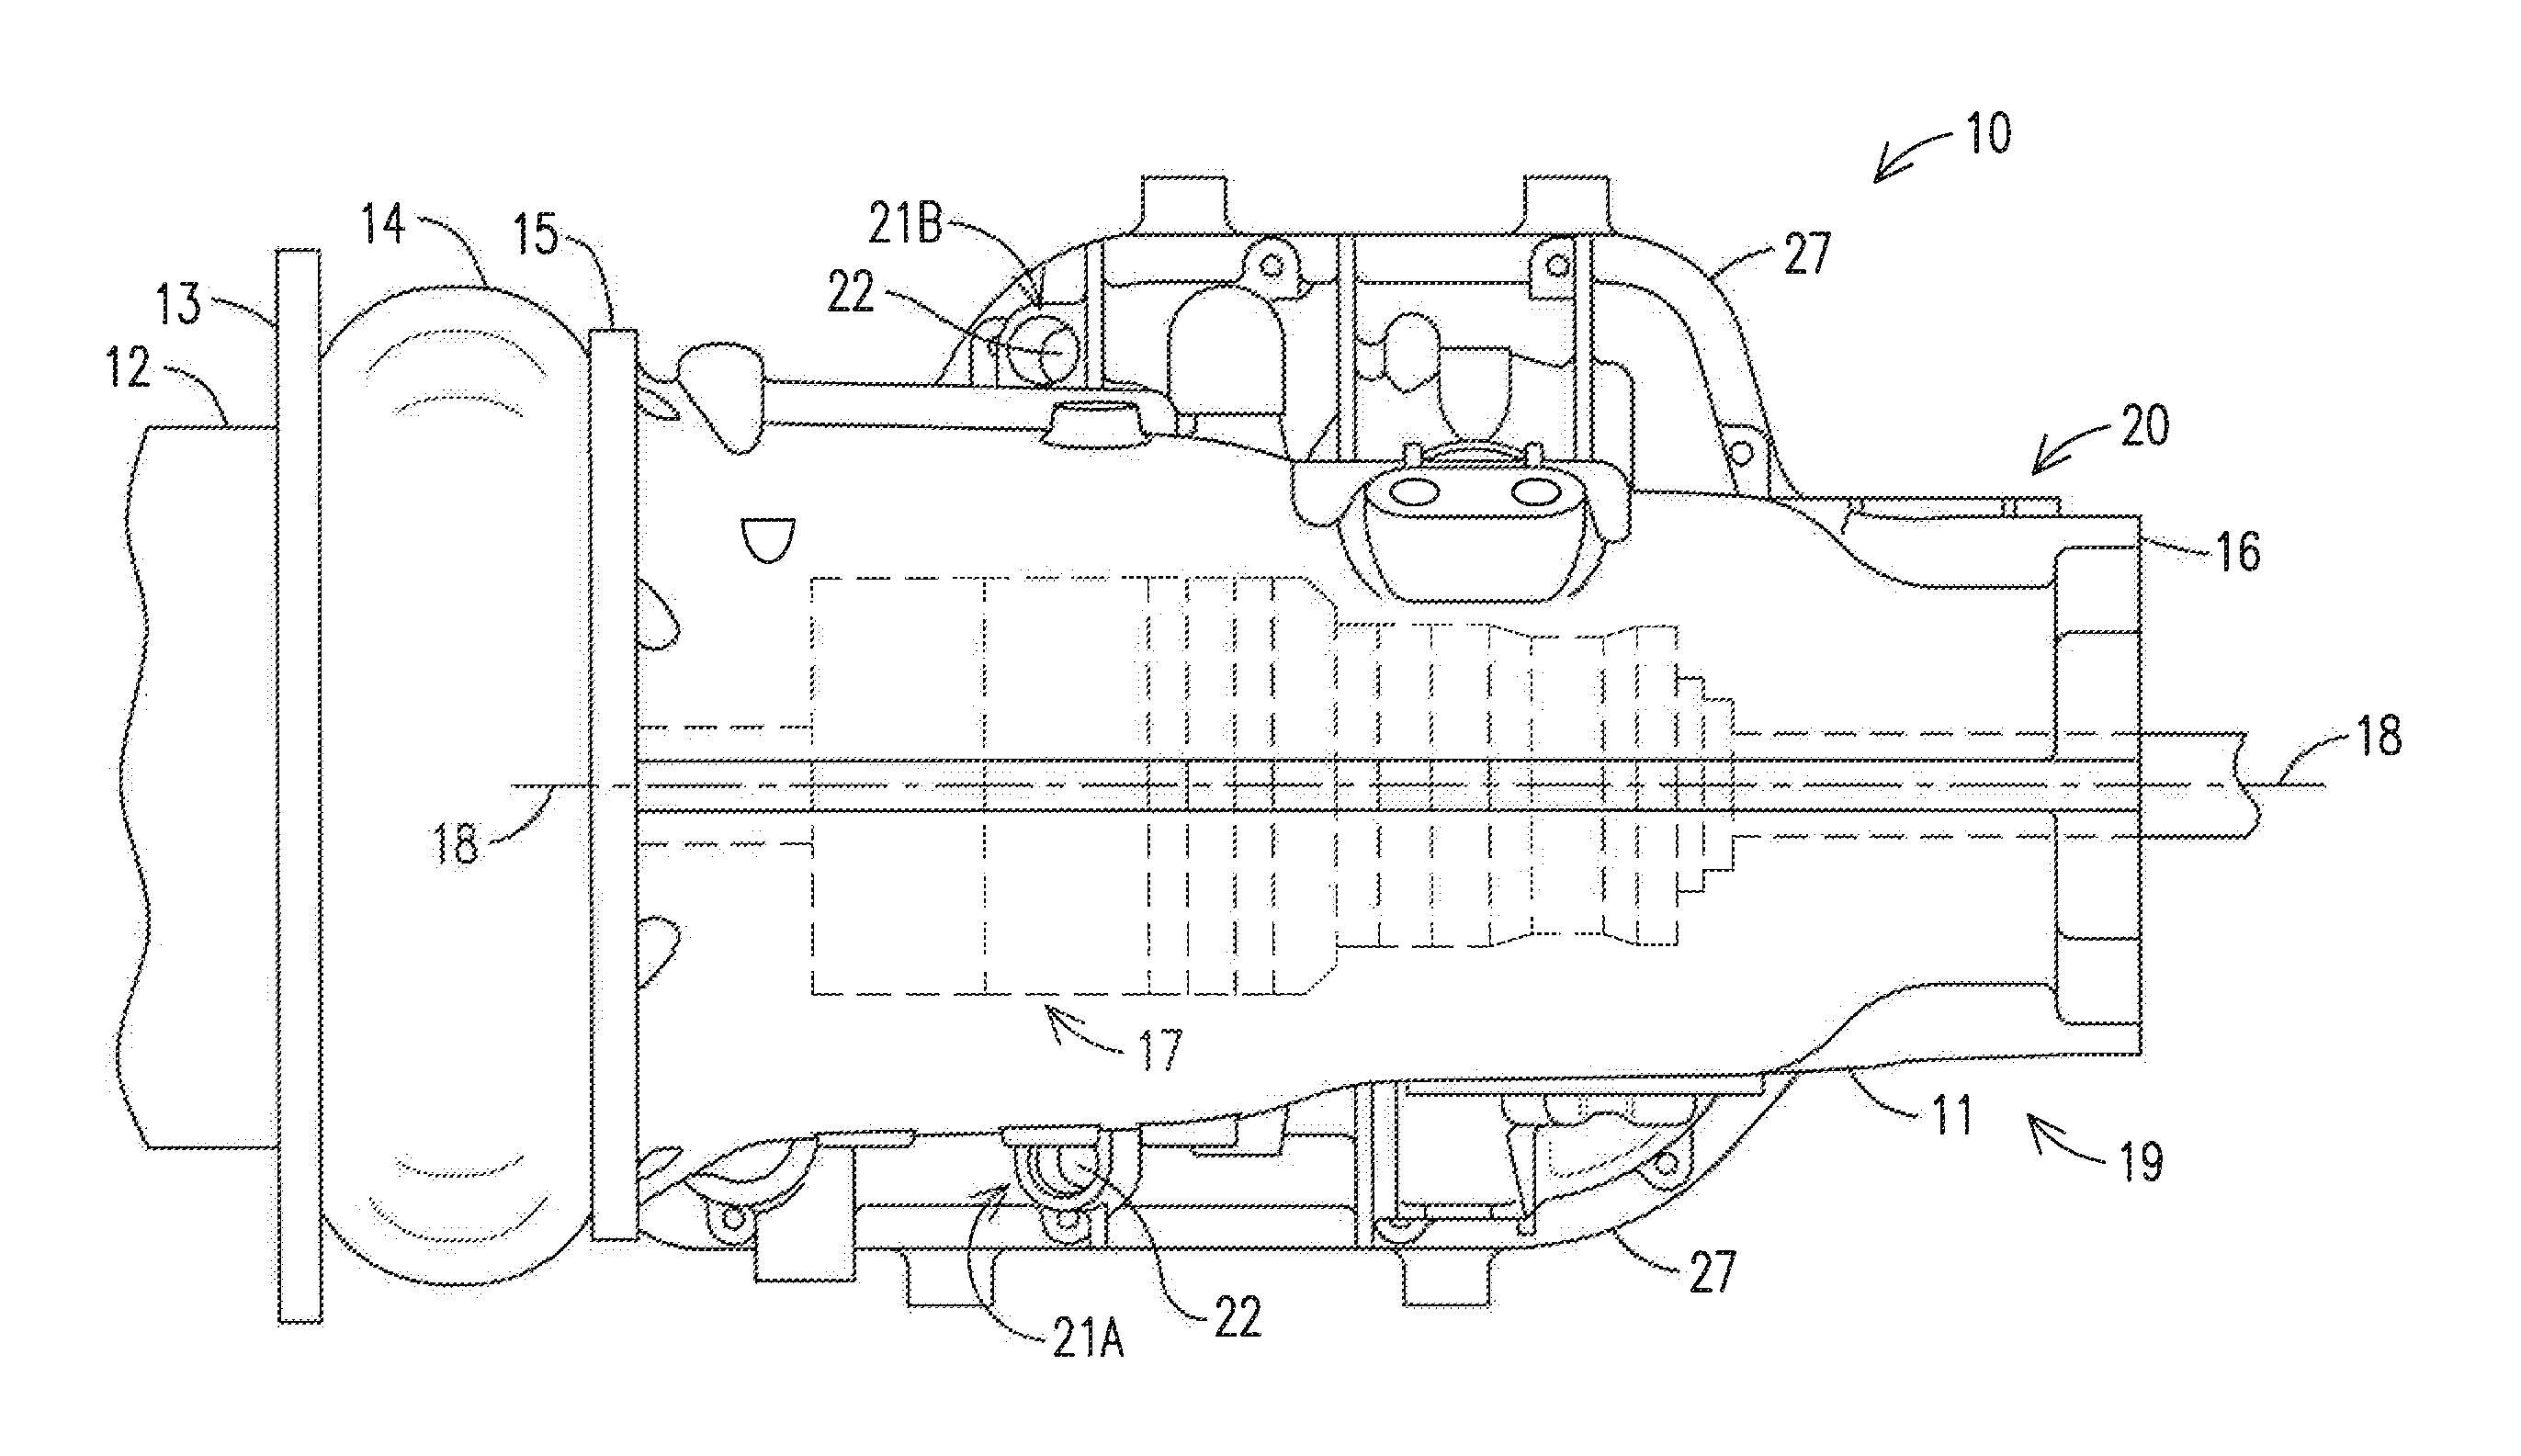 Transmission and transmission housing with multiple dipsticks and dipstick apertures, circumferentially positioned internal lugs and an adjacent fluid inlet port